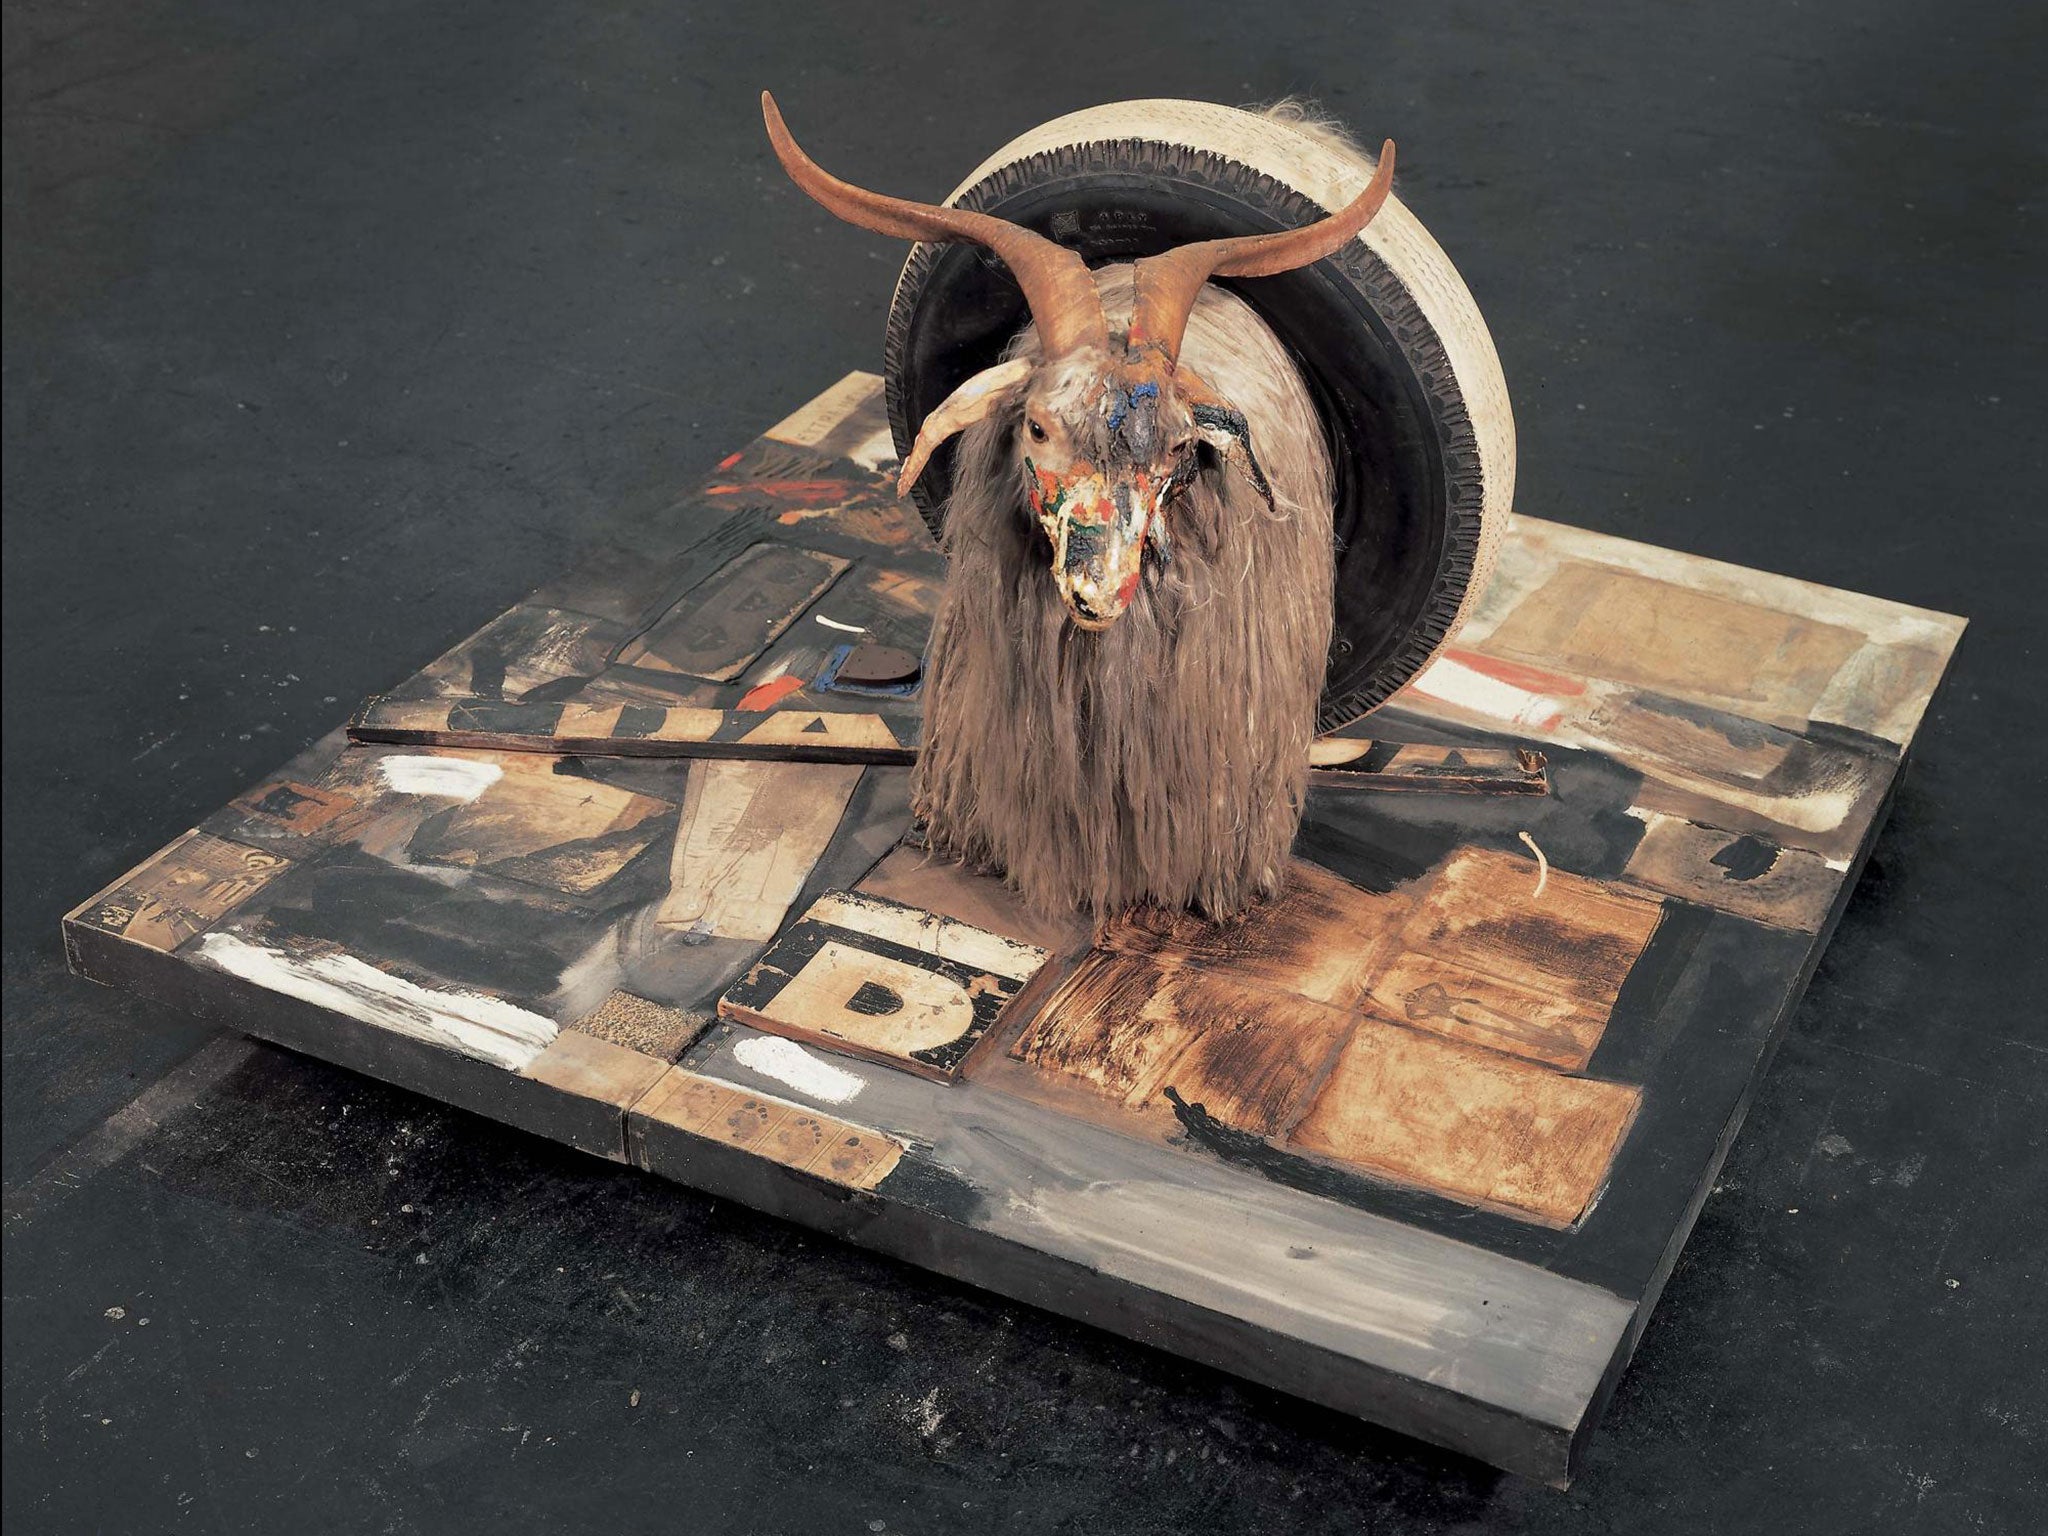 ‘Monogram’ forms part of the Robert Rauschenberg exhibition, opening in December 2015